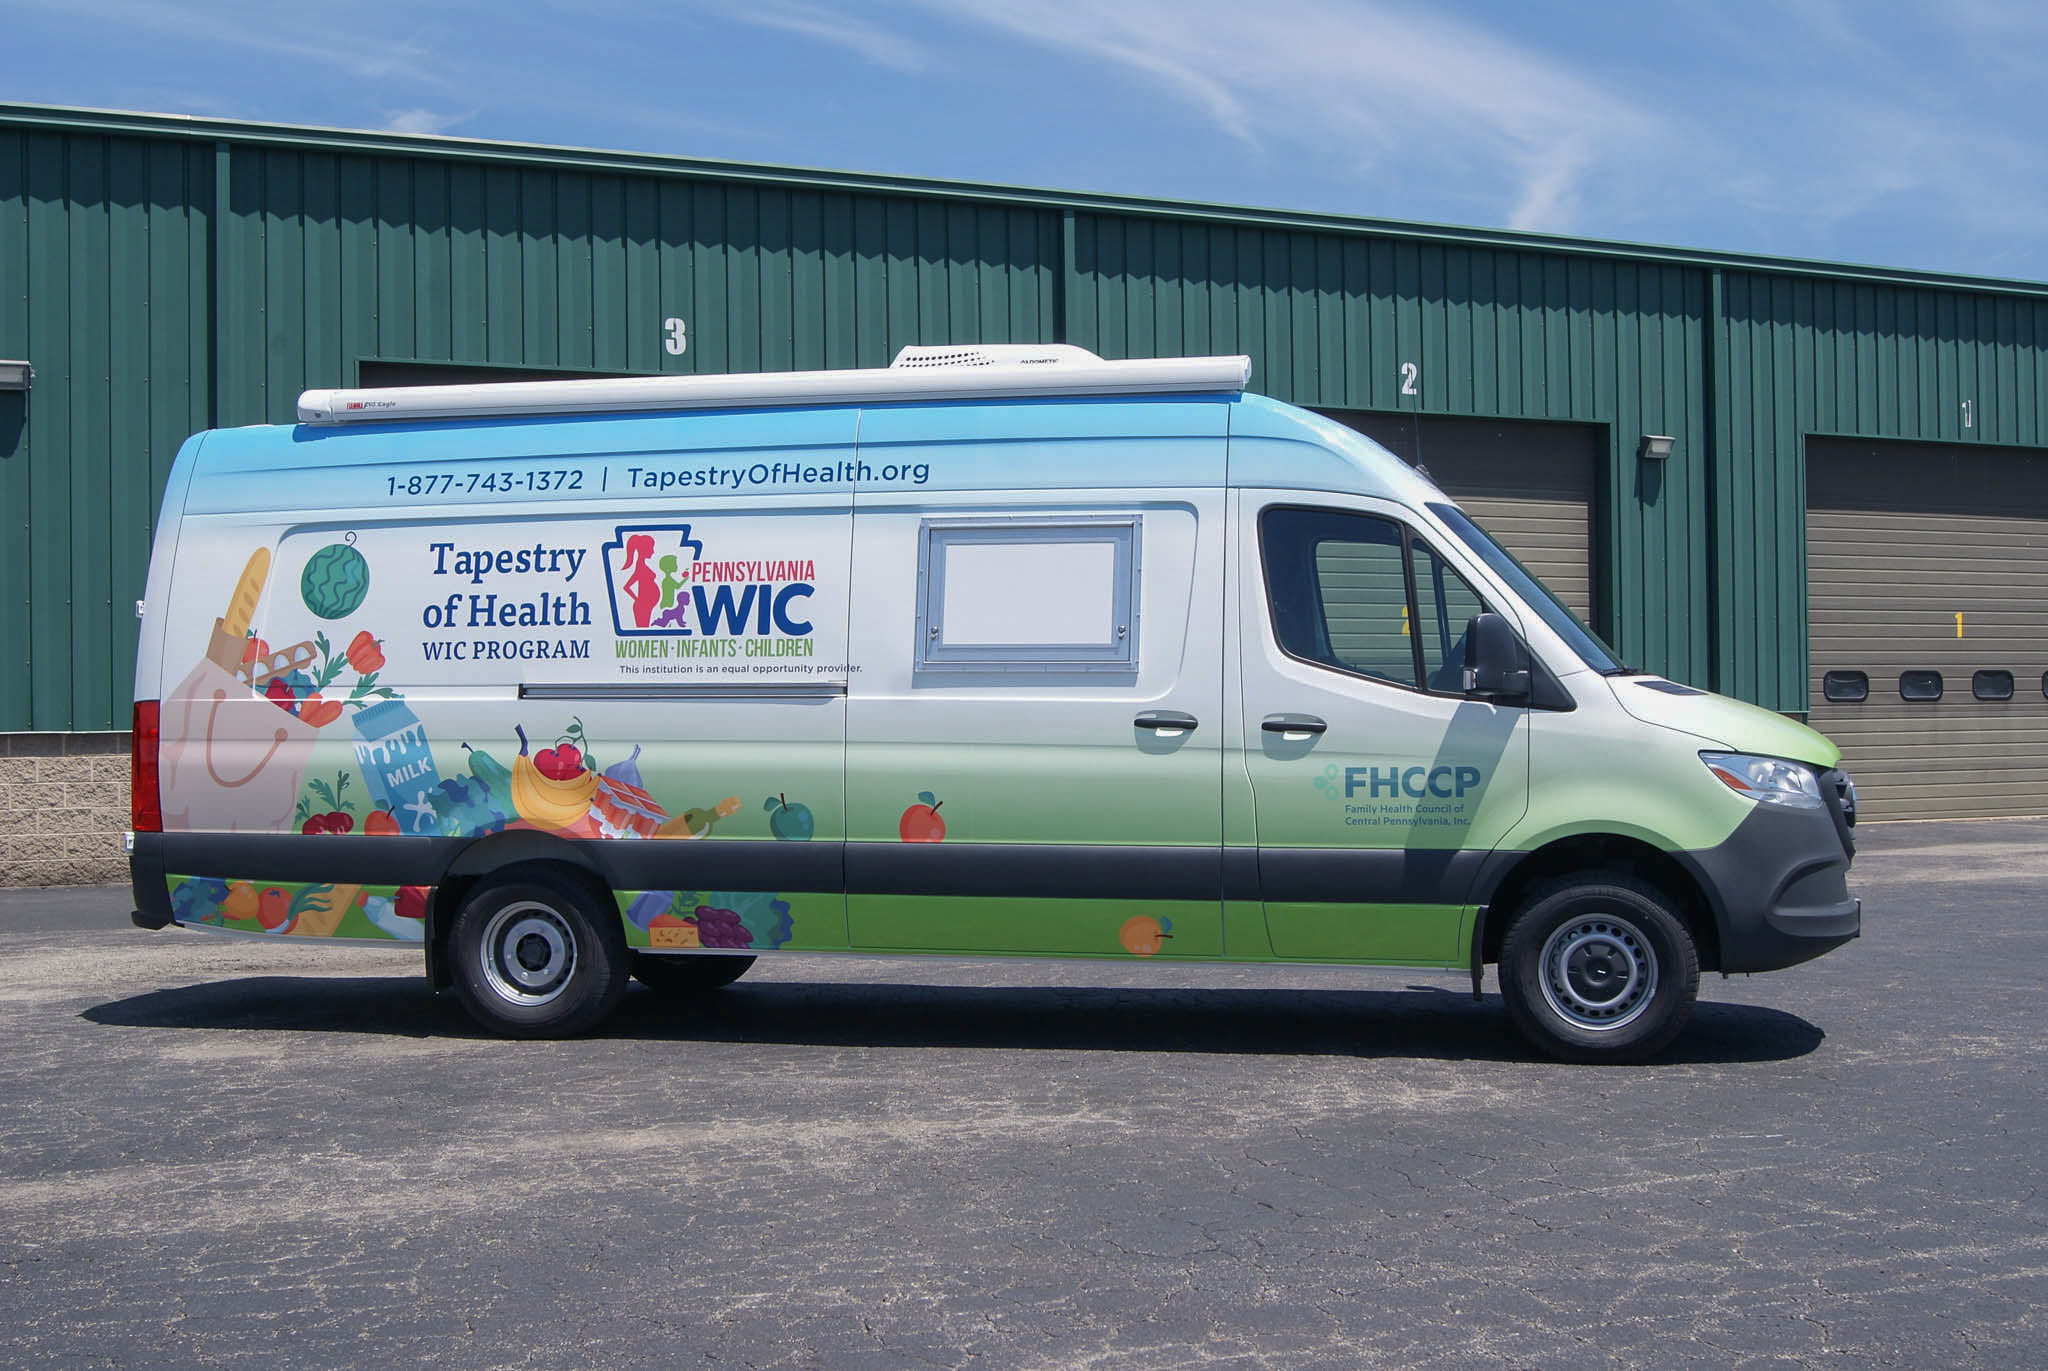 Direct side view of the Mobile Outreach sprinter van. It features the logo for Tapestry of Health's WIC program, their phone number, and their website.